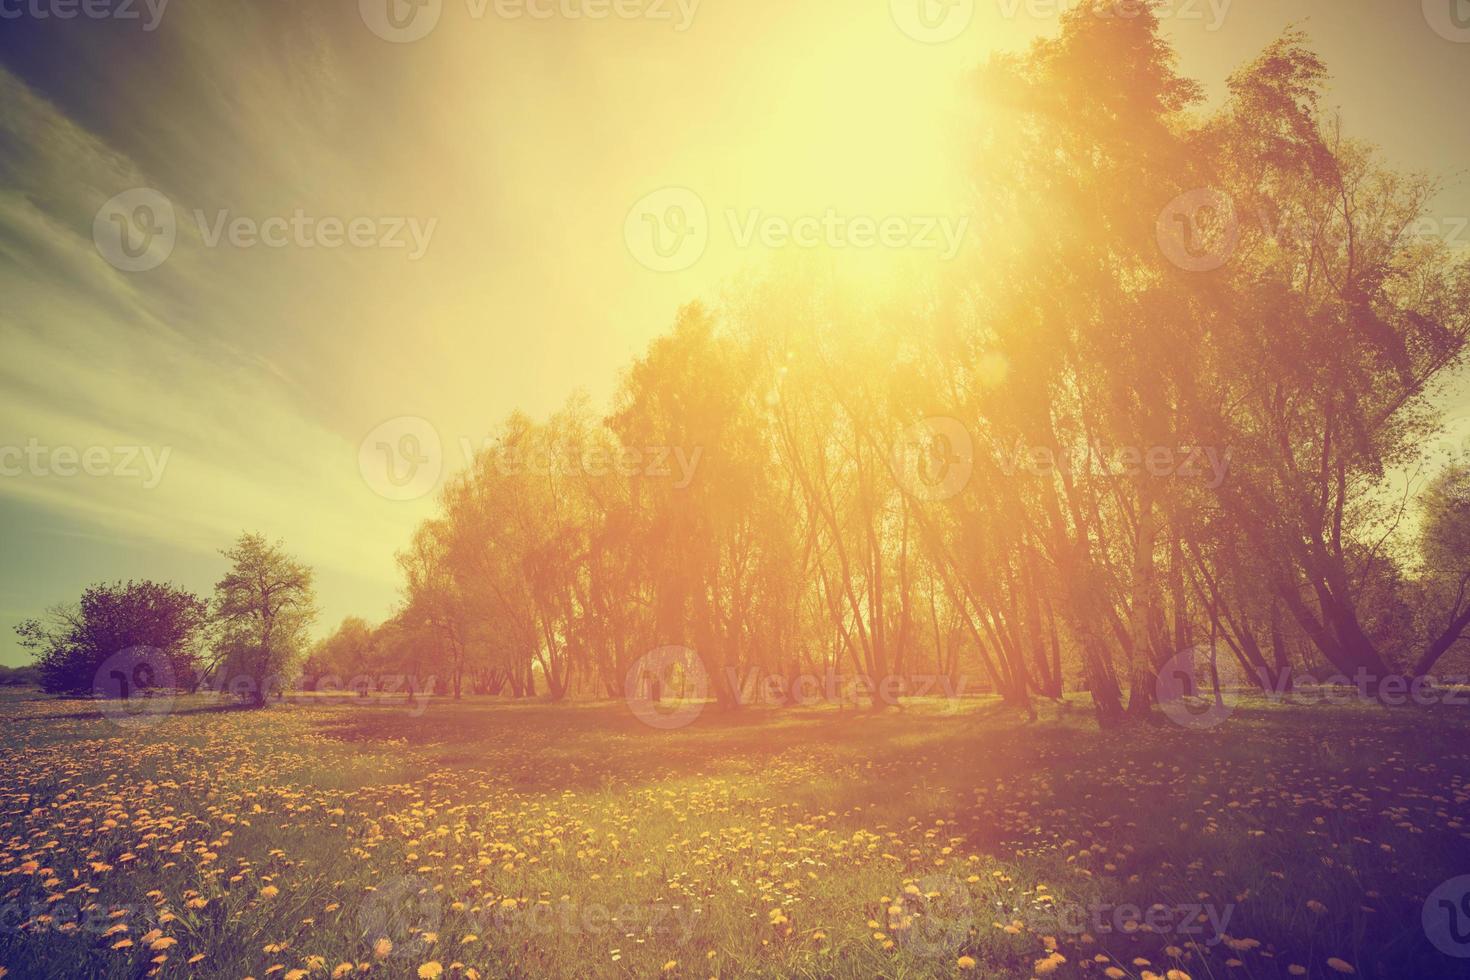 Vintage nature. Spring sunny park, trees and dandelions photo